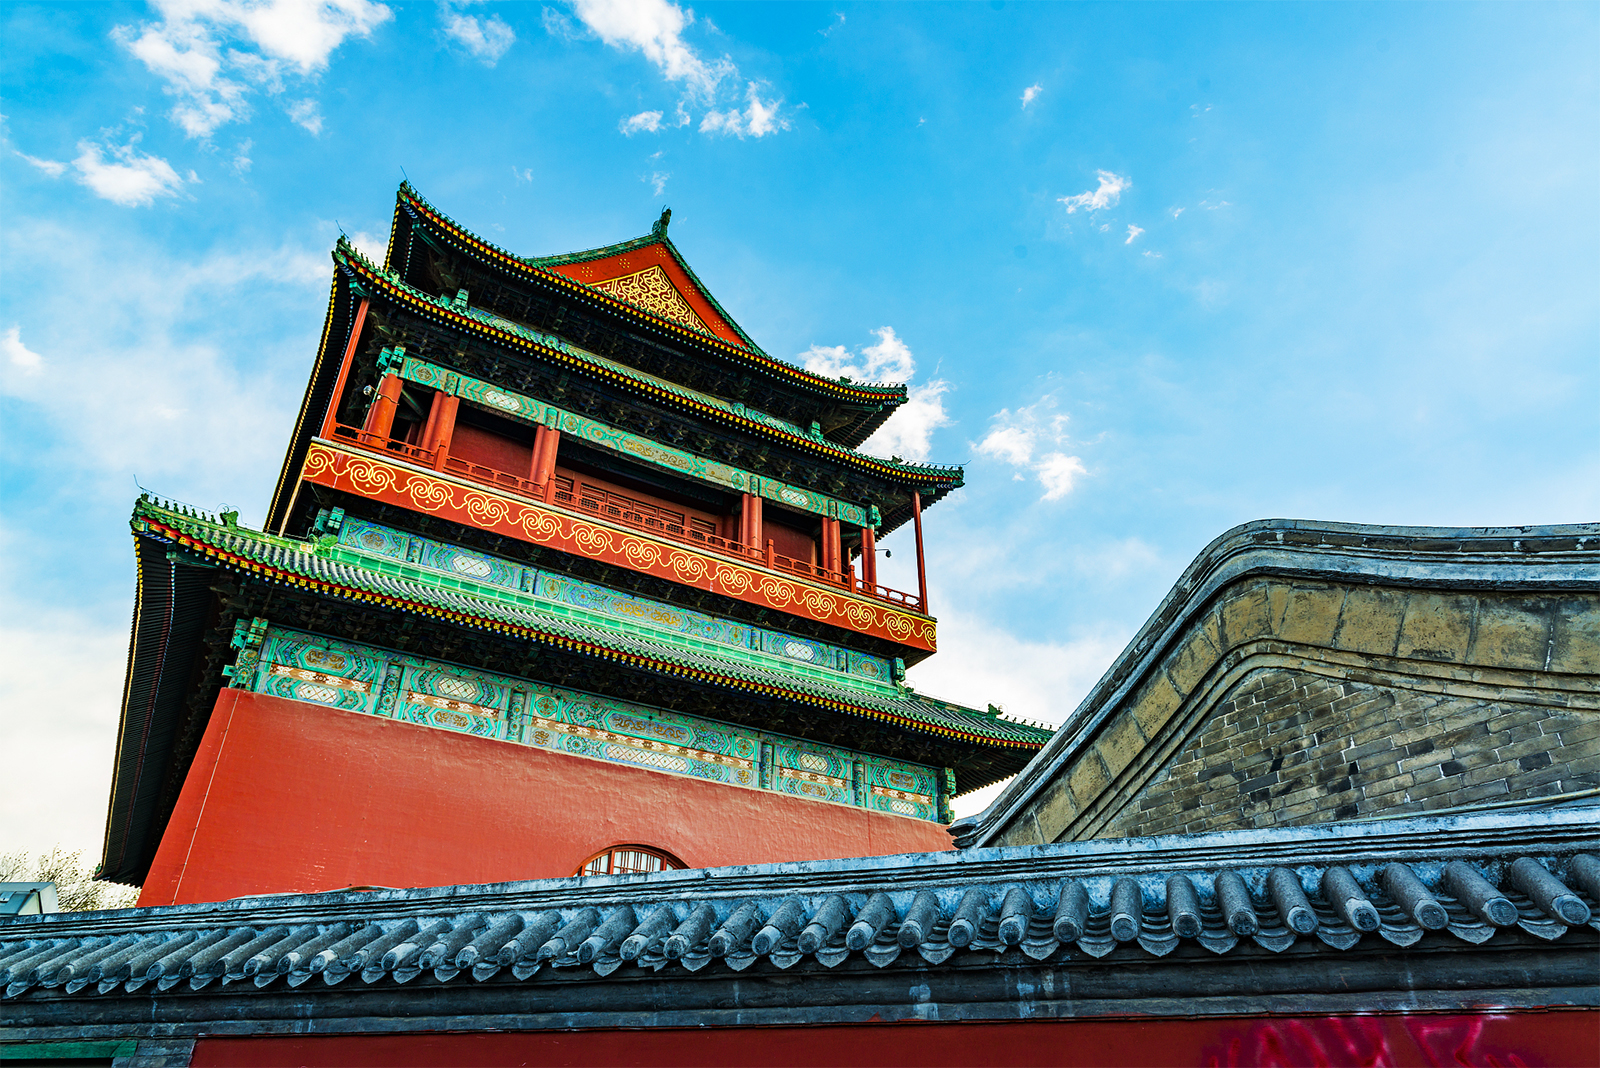 A file photos shows the Drum Tower at the northern end of the Beijing Central Axis. /CFP